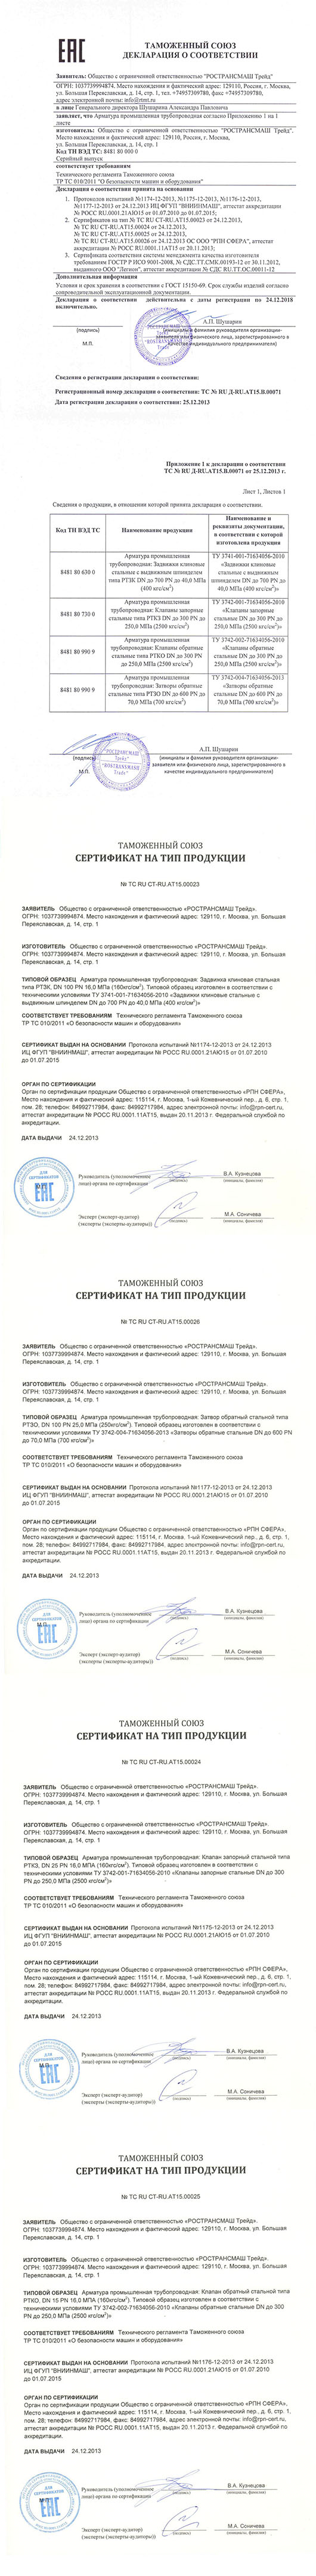 Certificates of the Customs Union for all types of products have been obtained and a declaration of conformity has been issued.